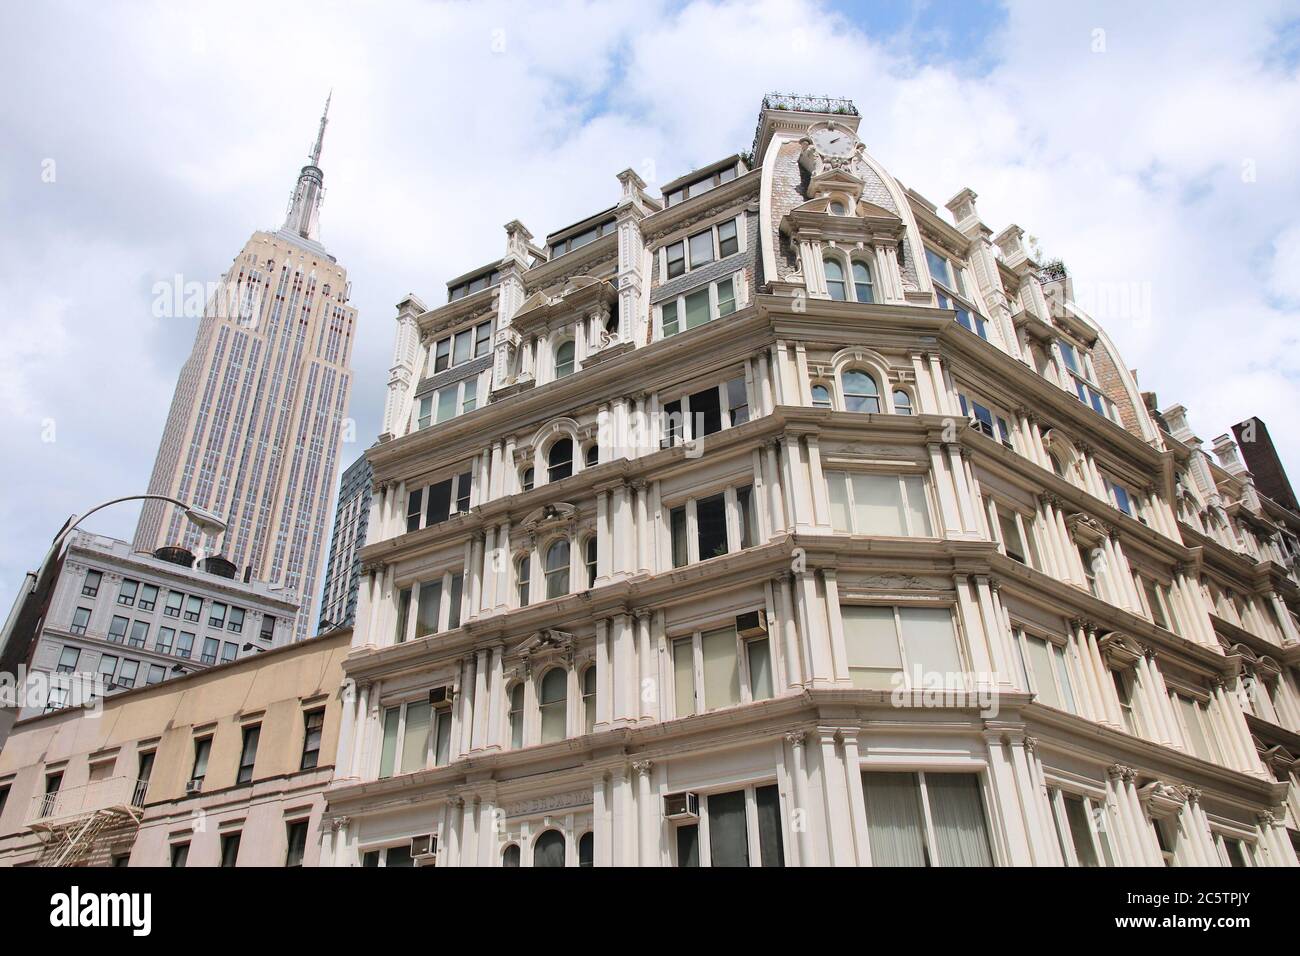 NEW YORK, USA - JULY 4, 2013: Architecture of Gilsey House in New York. The building is a former hotel located at Broadway in NoMad neighborhood of Ma Stock Photo